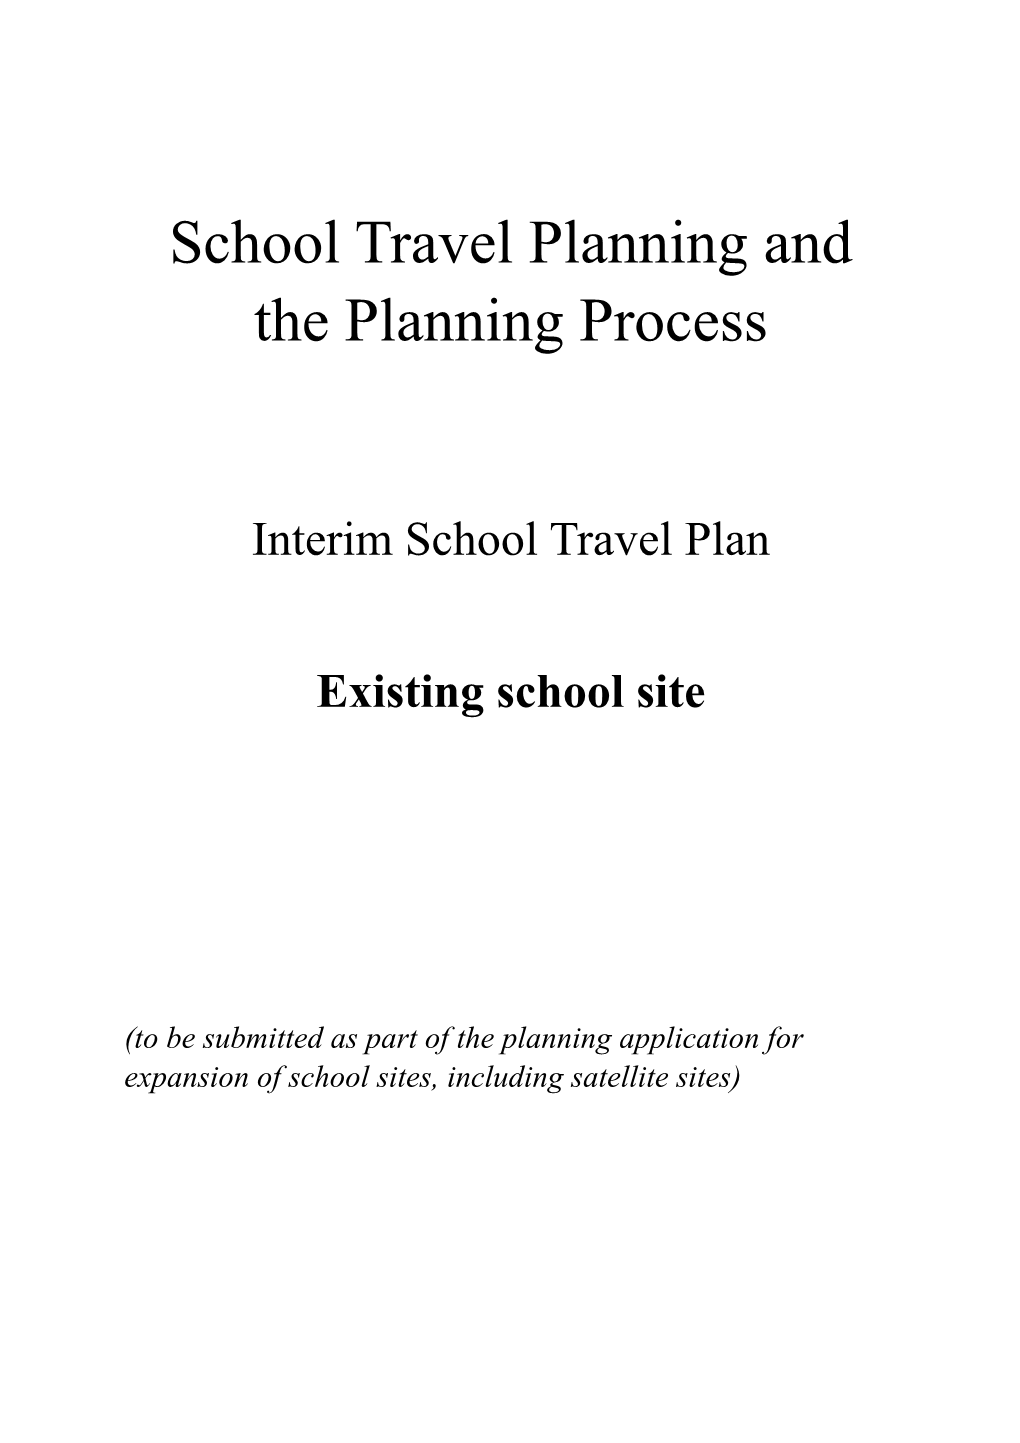 School Travel Planning and the Planningprocess